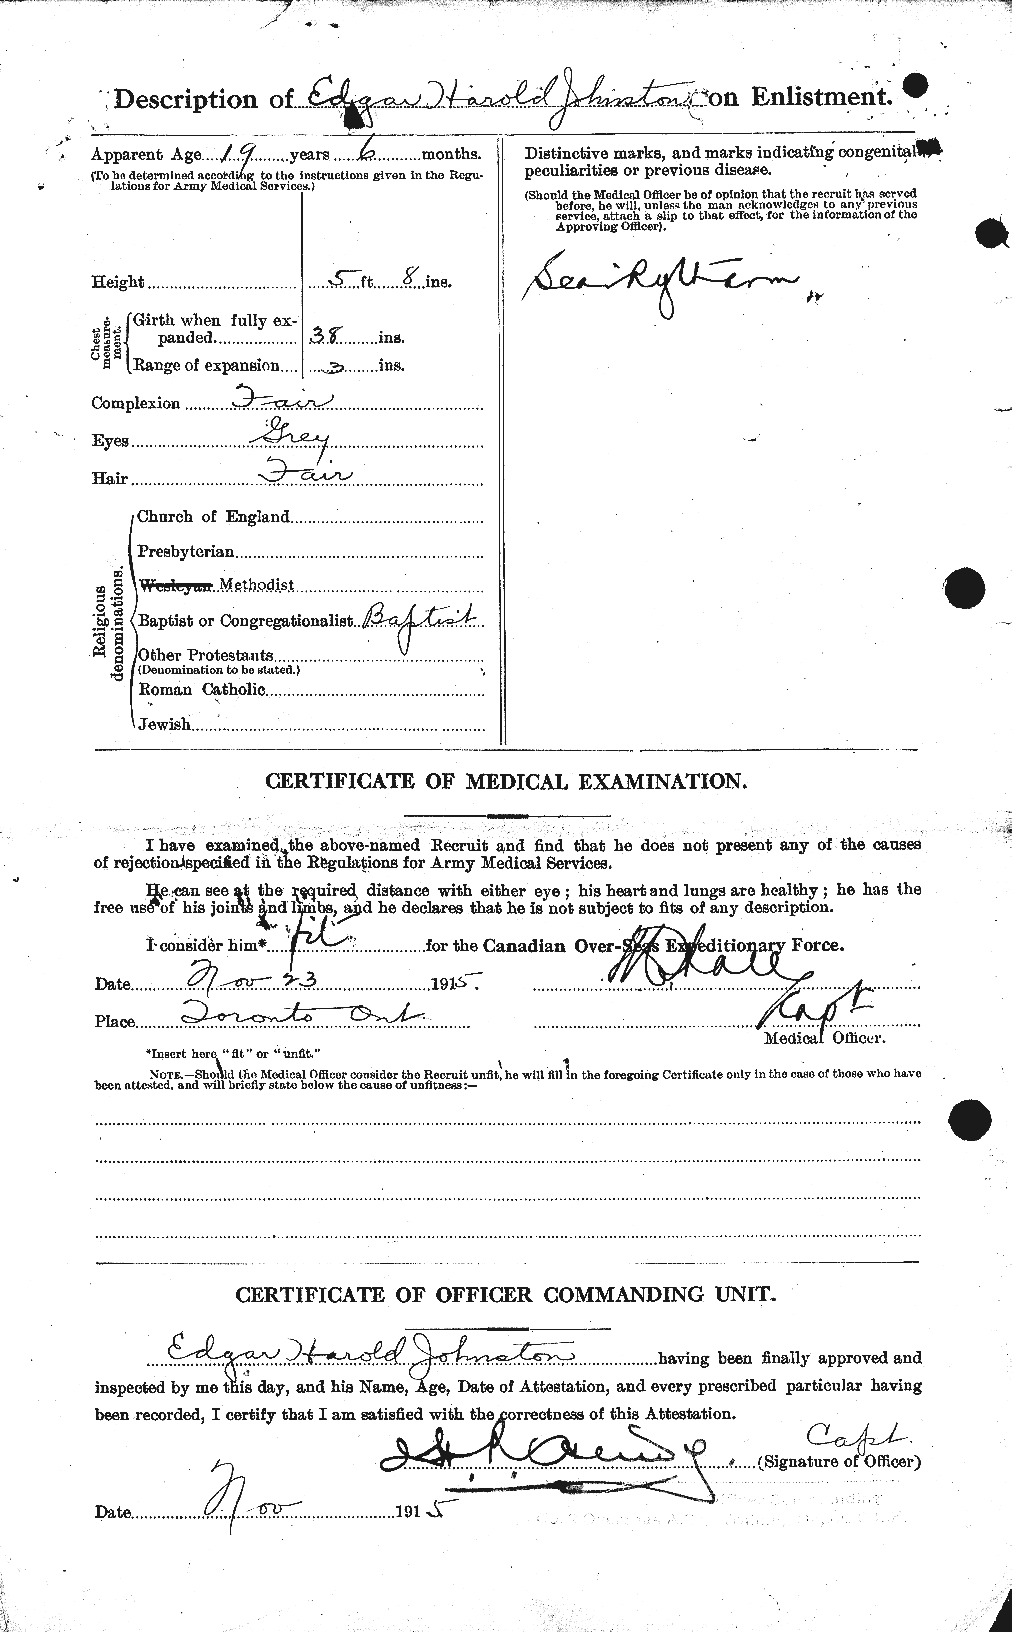 Personnel Records of the First World War - CEF 423205b